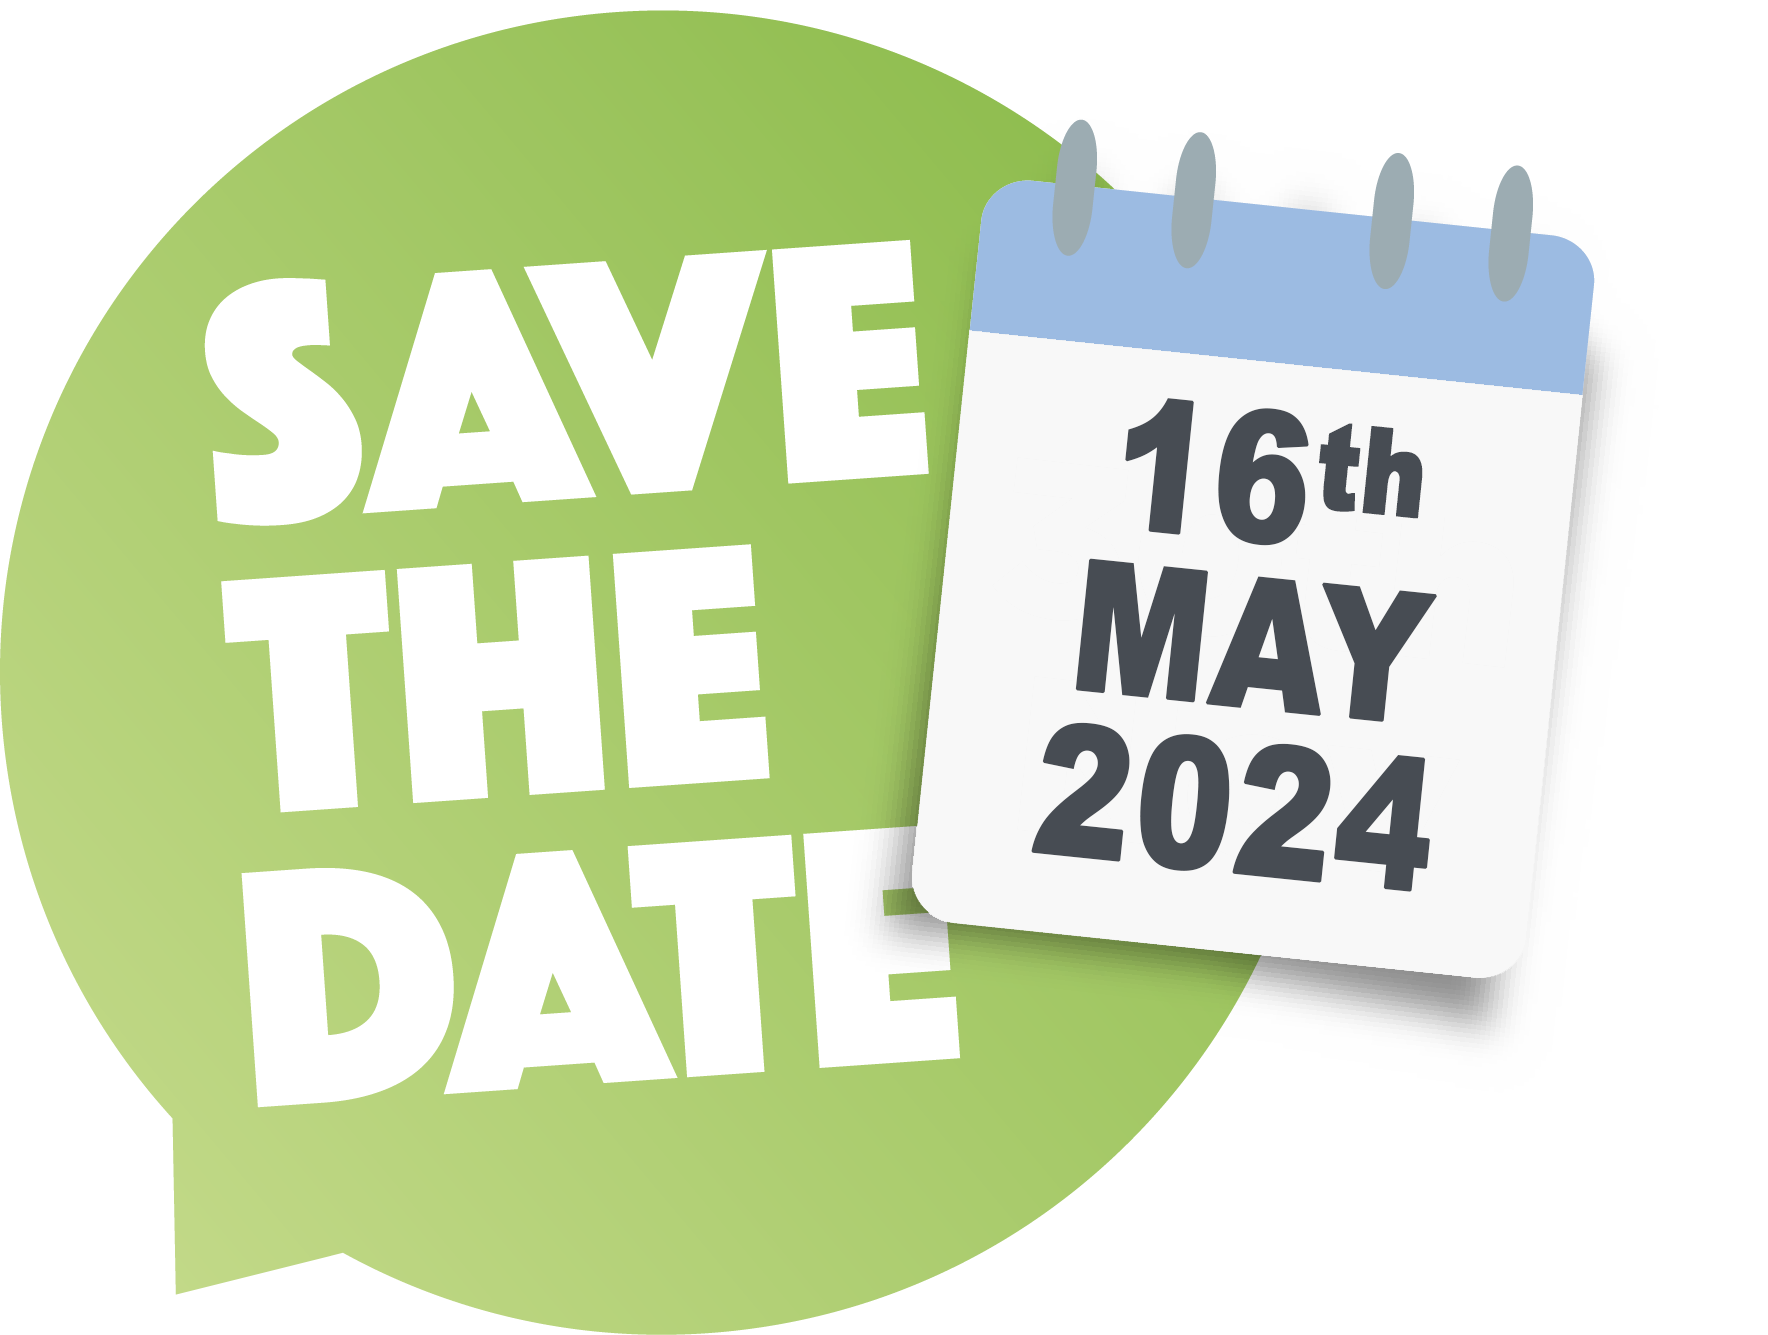 IFIG-Save-the-Date 16th May 2024